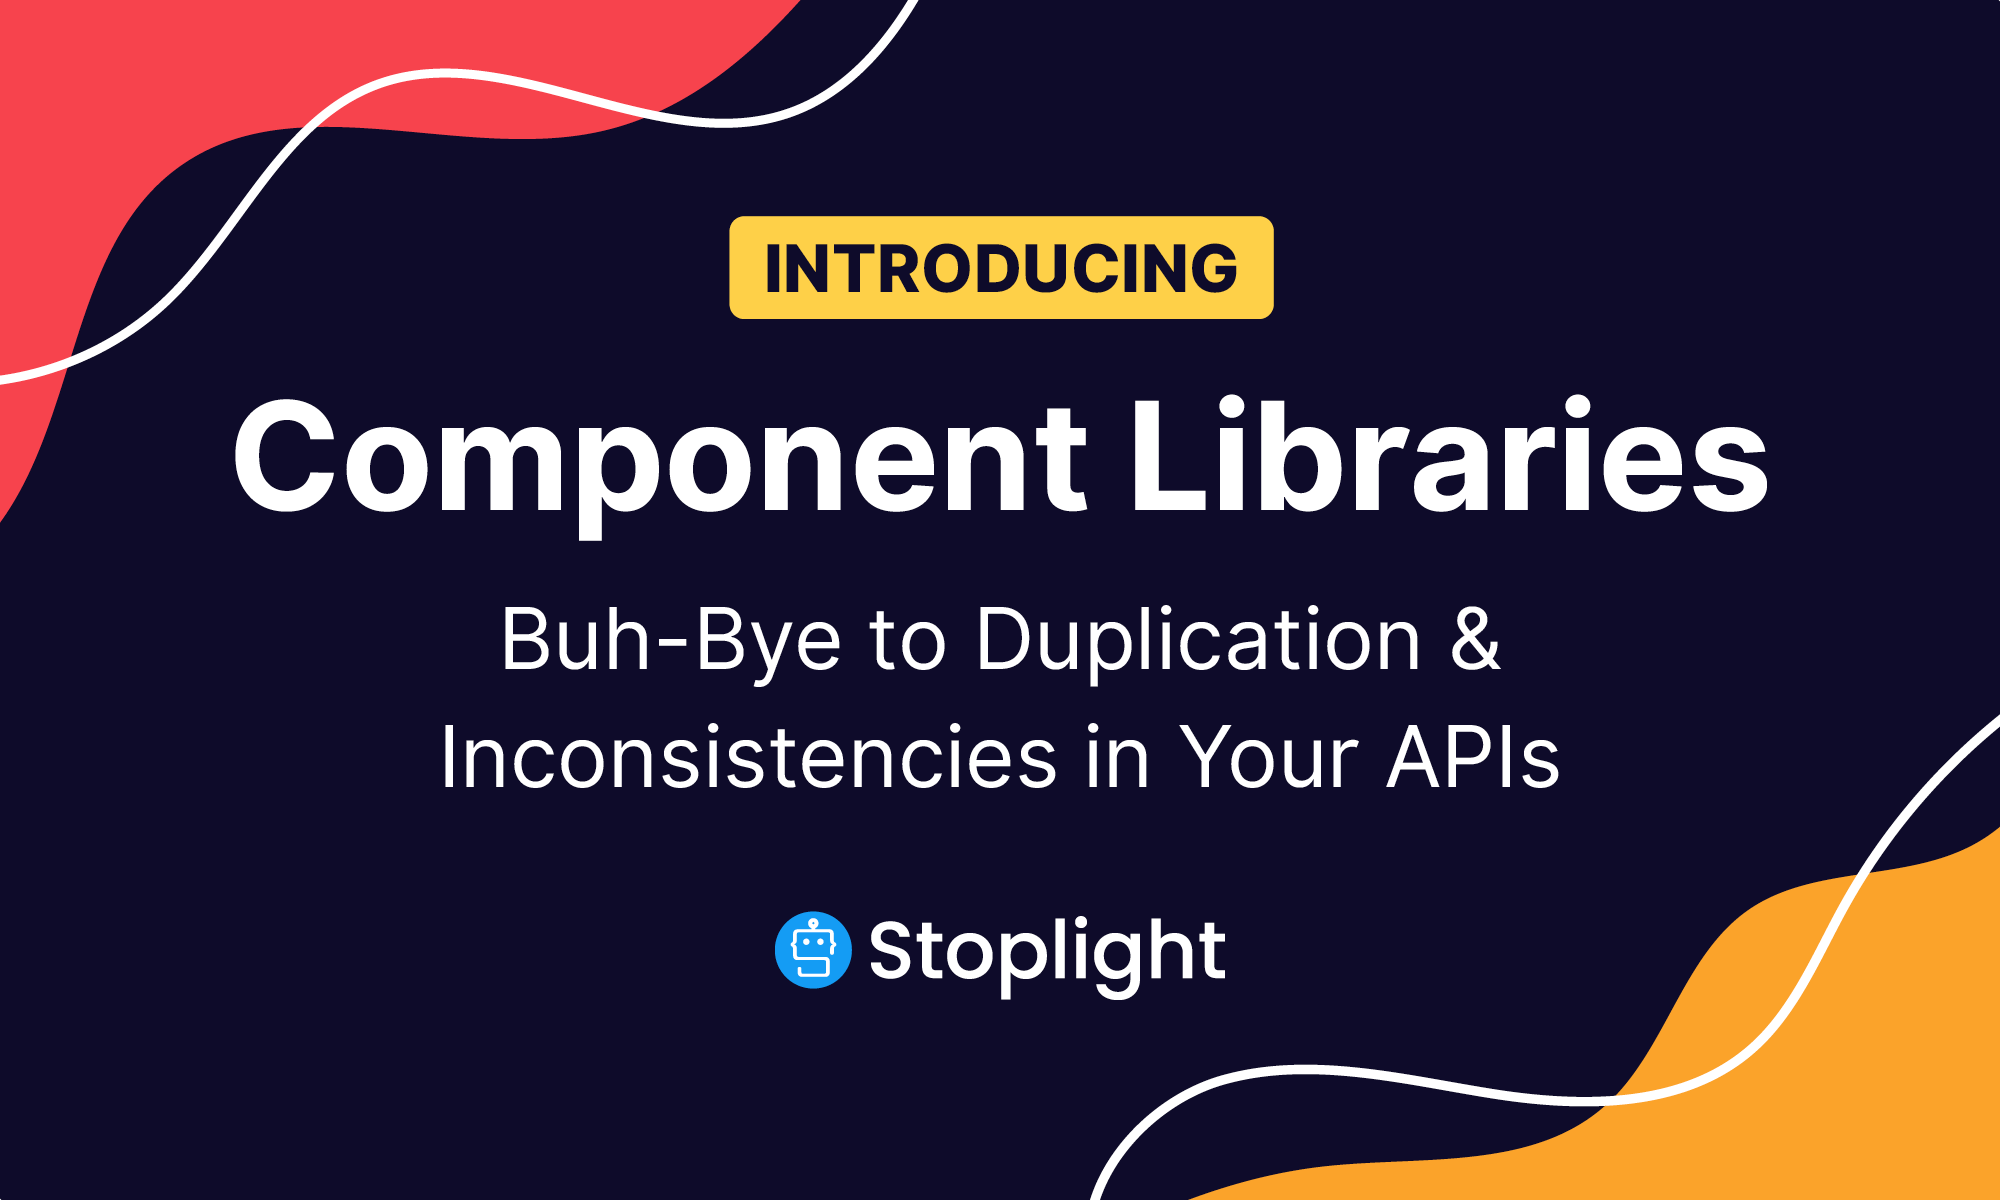 Introducing Component Libraries: Buh-Bye to Duplication & Inconsistencies in Your APIs